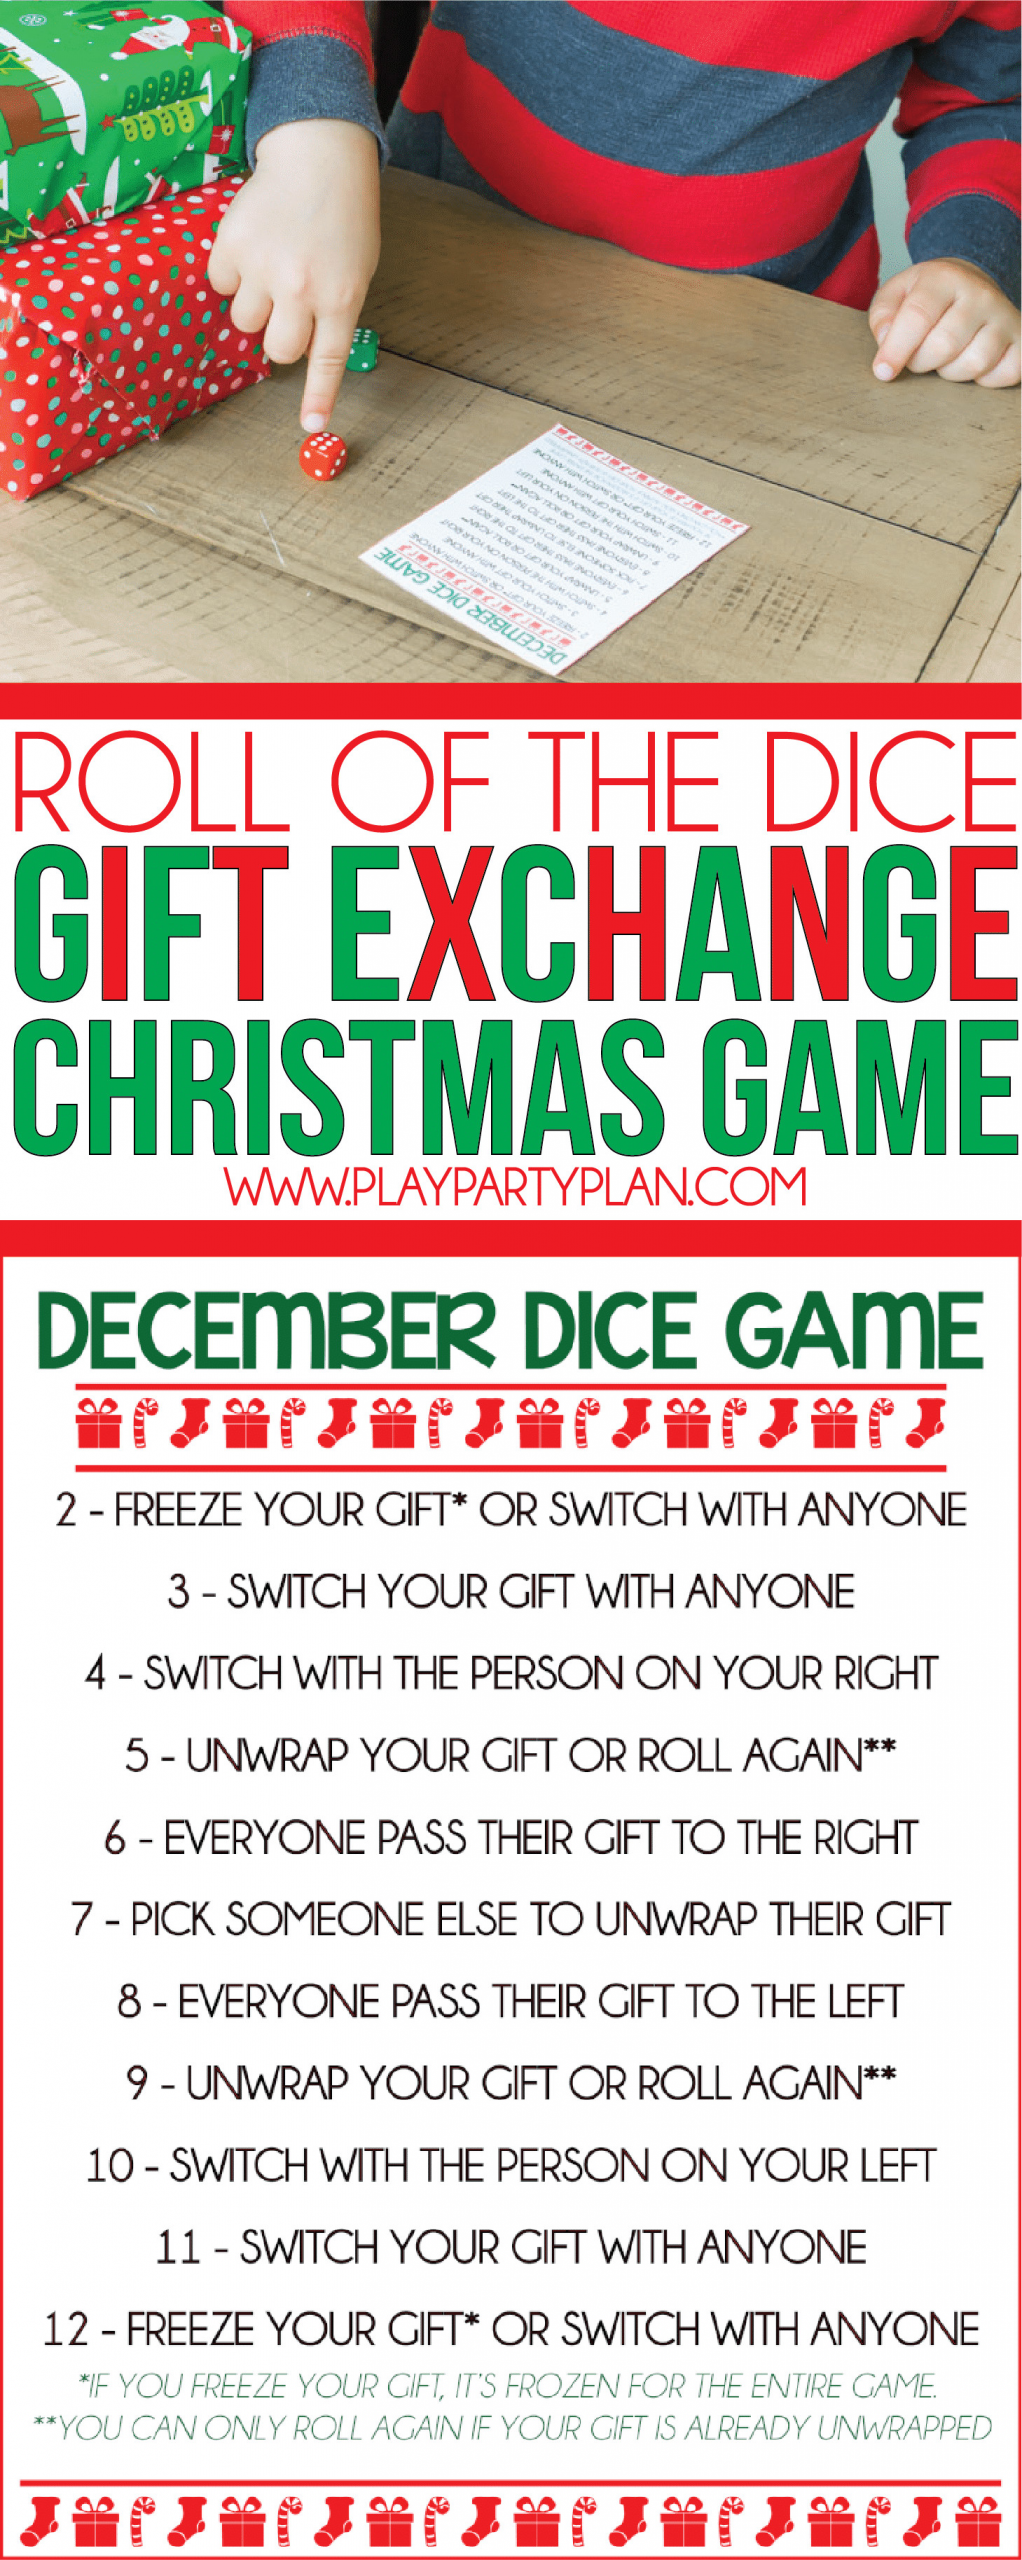 Holiday Gift Exchange Game Ideas
 11 Fun & Creative Gift Exchange Games You Have to Try